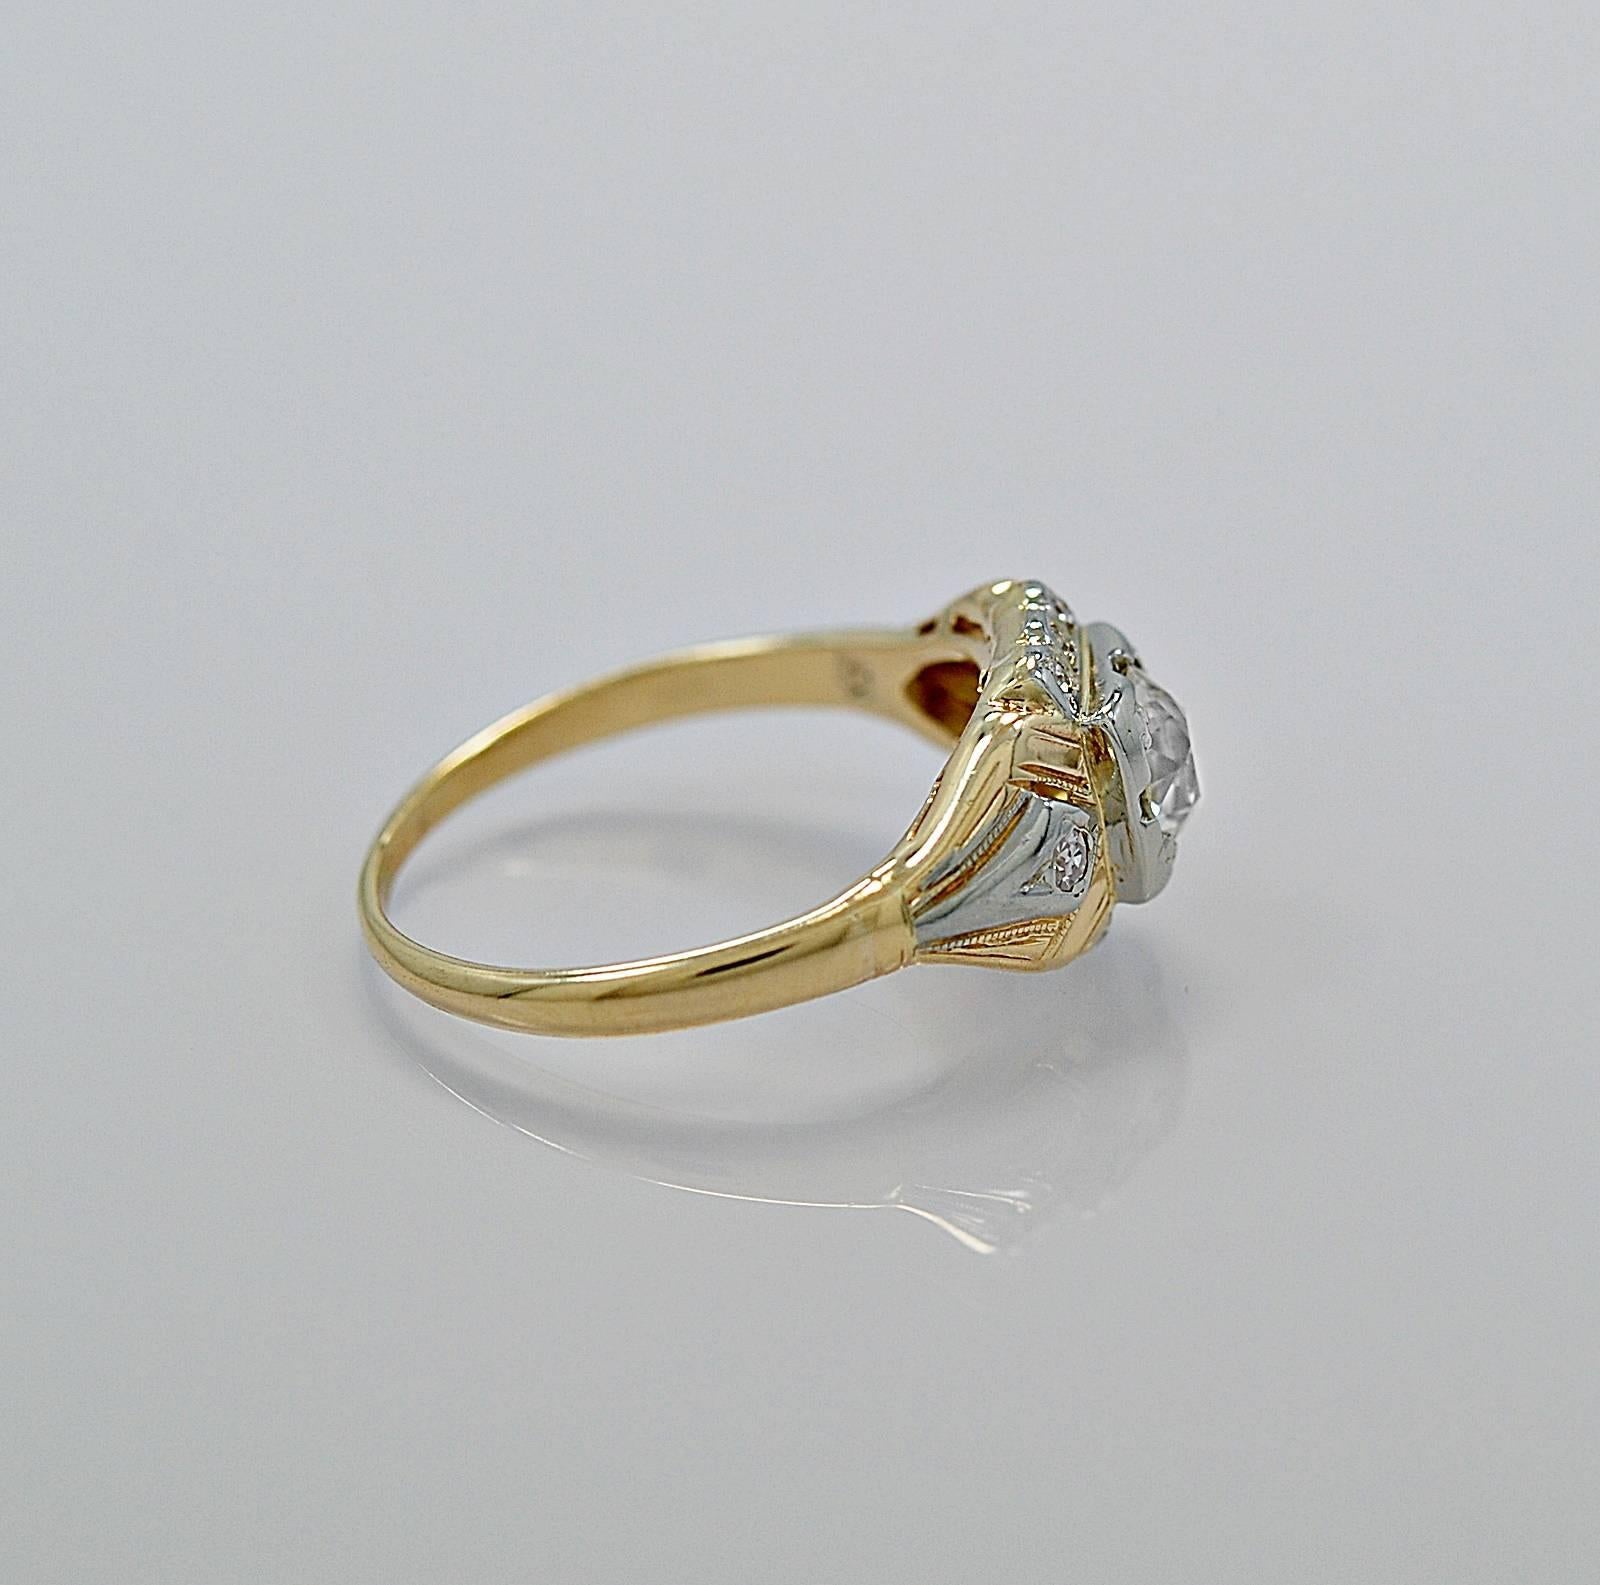 A wonderful antique engagement ring crafted in 14K white/yellow gold and features a .52ct. apx. European cut center diamond with I1 clarity (100% eye clean) and H-I color. The center diamond is set in white gold with trefoil prongs. There are .10ct.